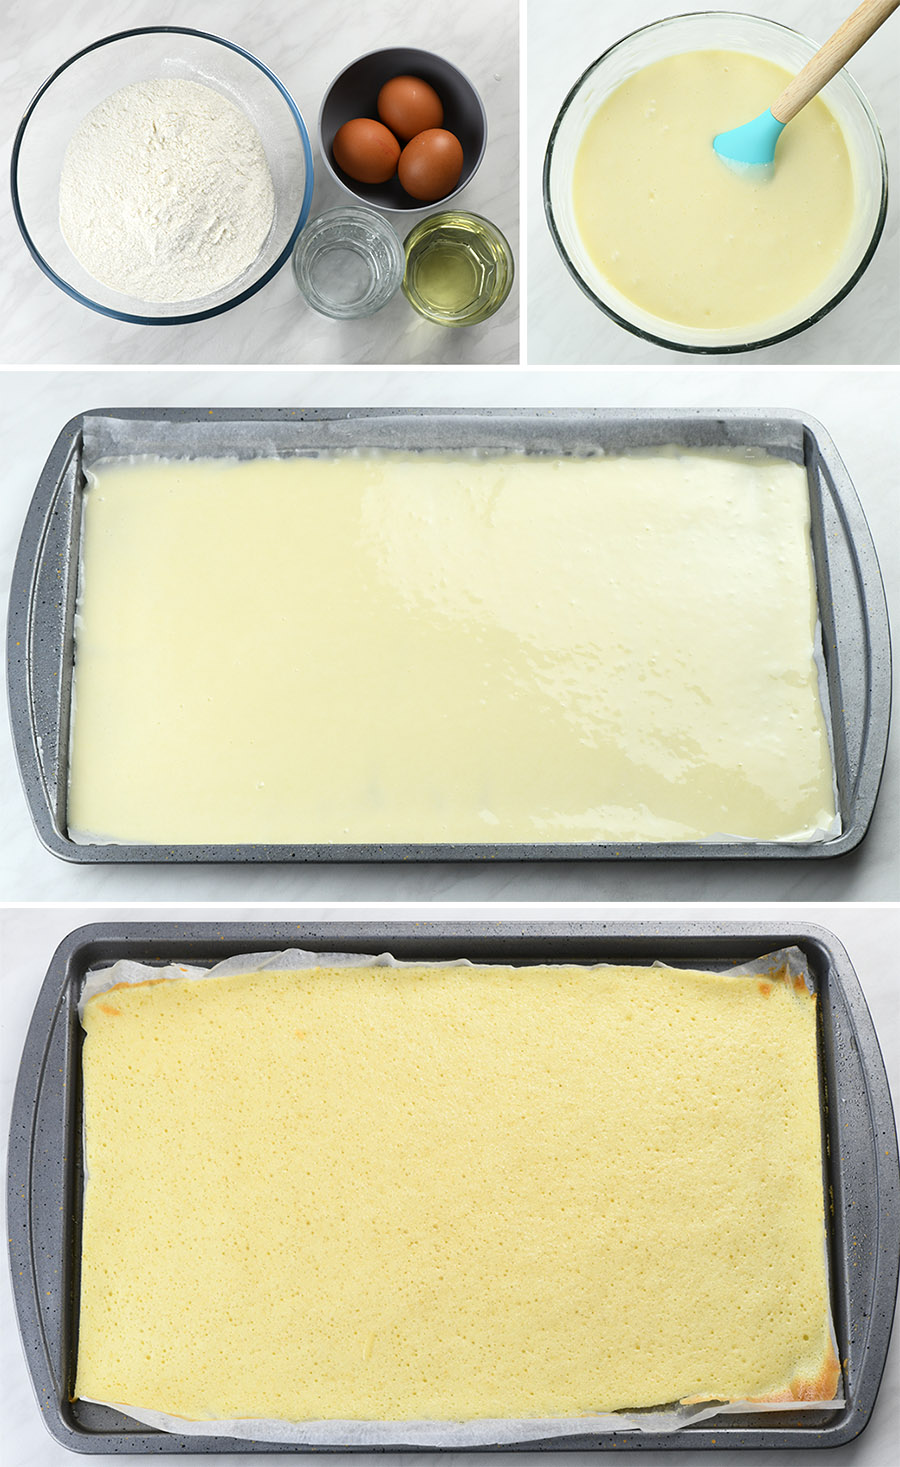 Four images of preparing confection layer.